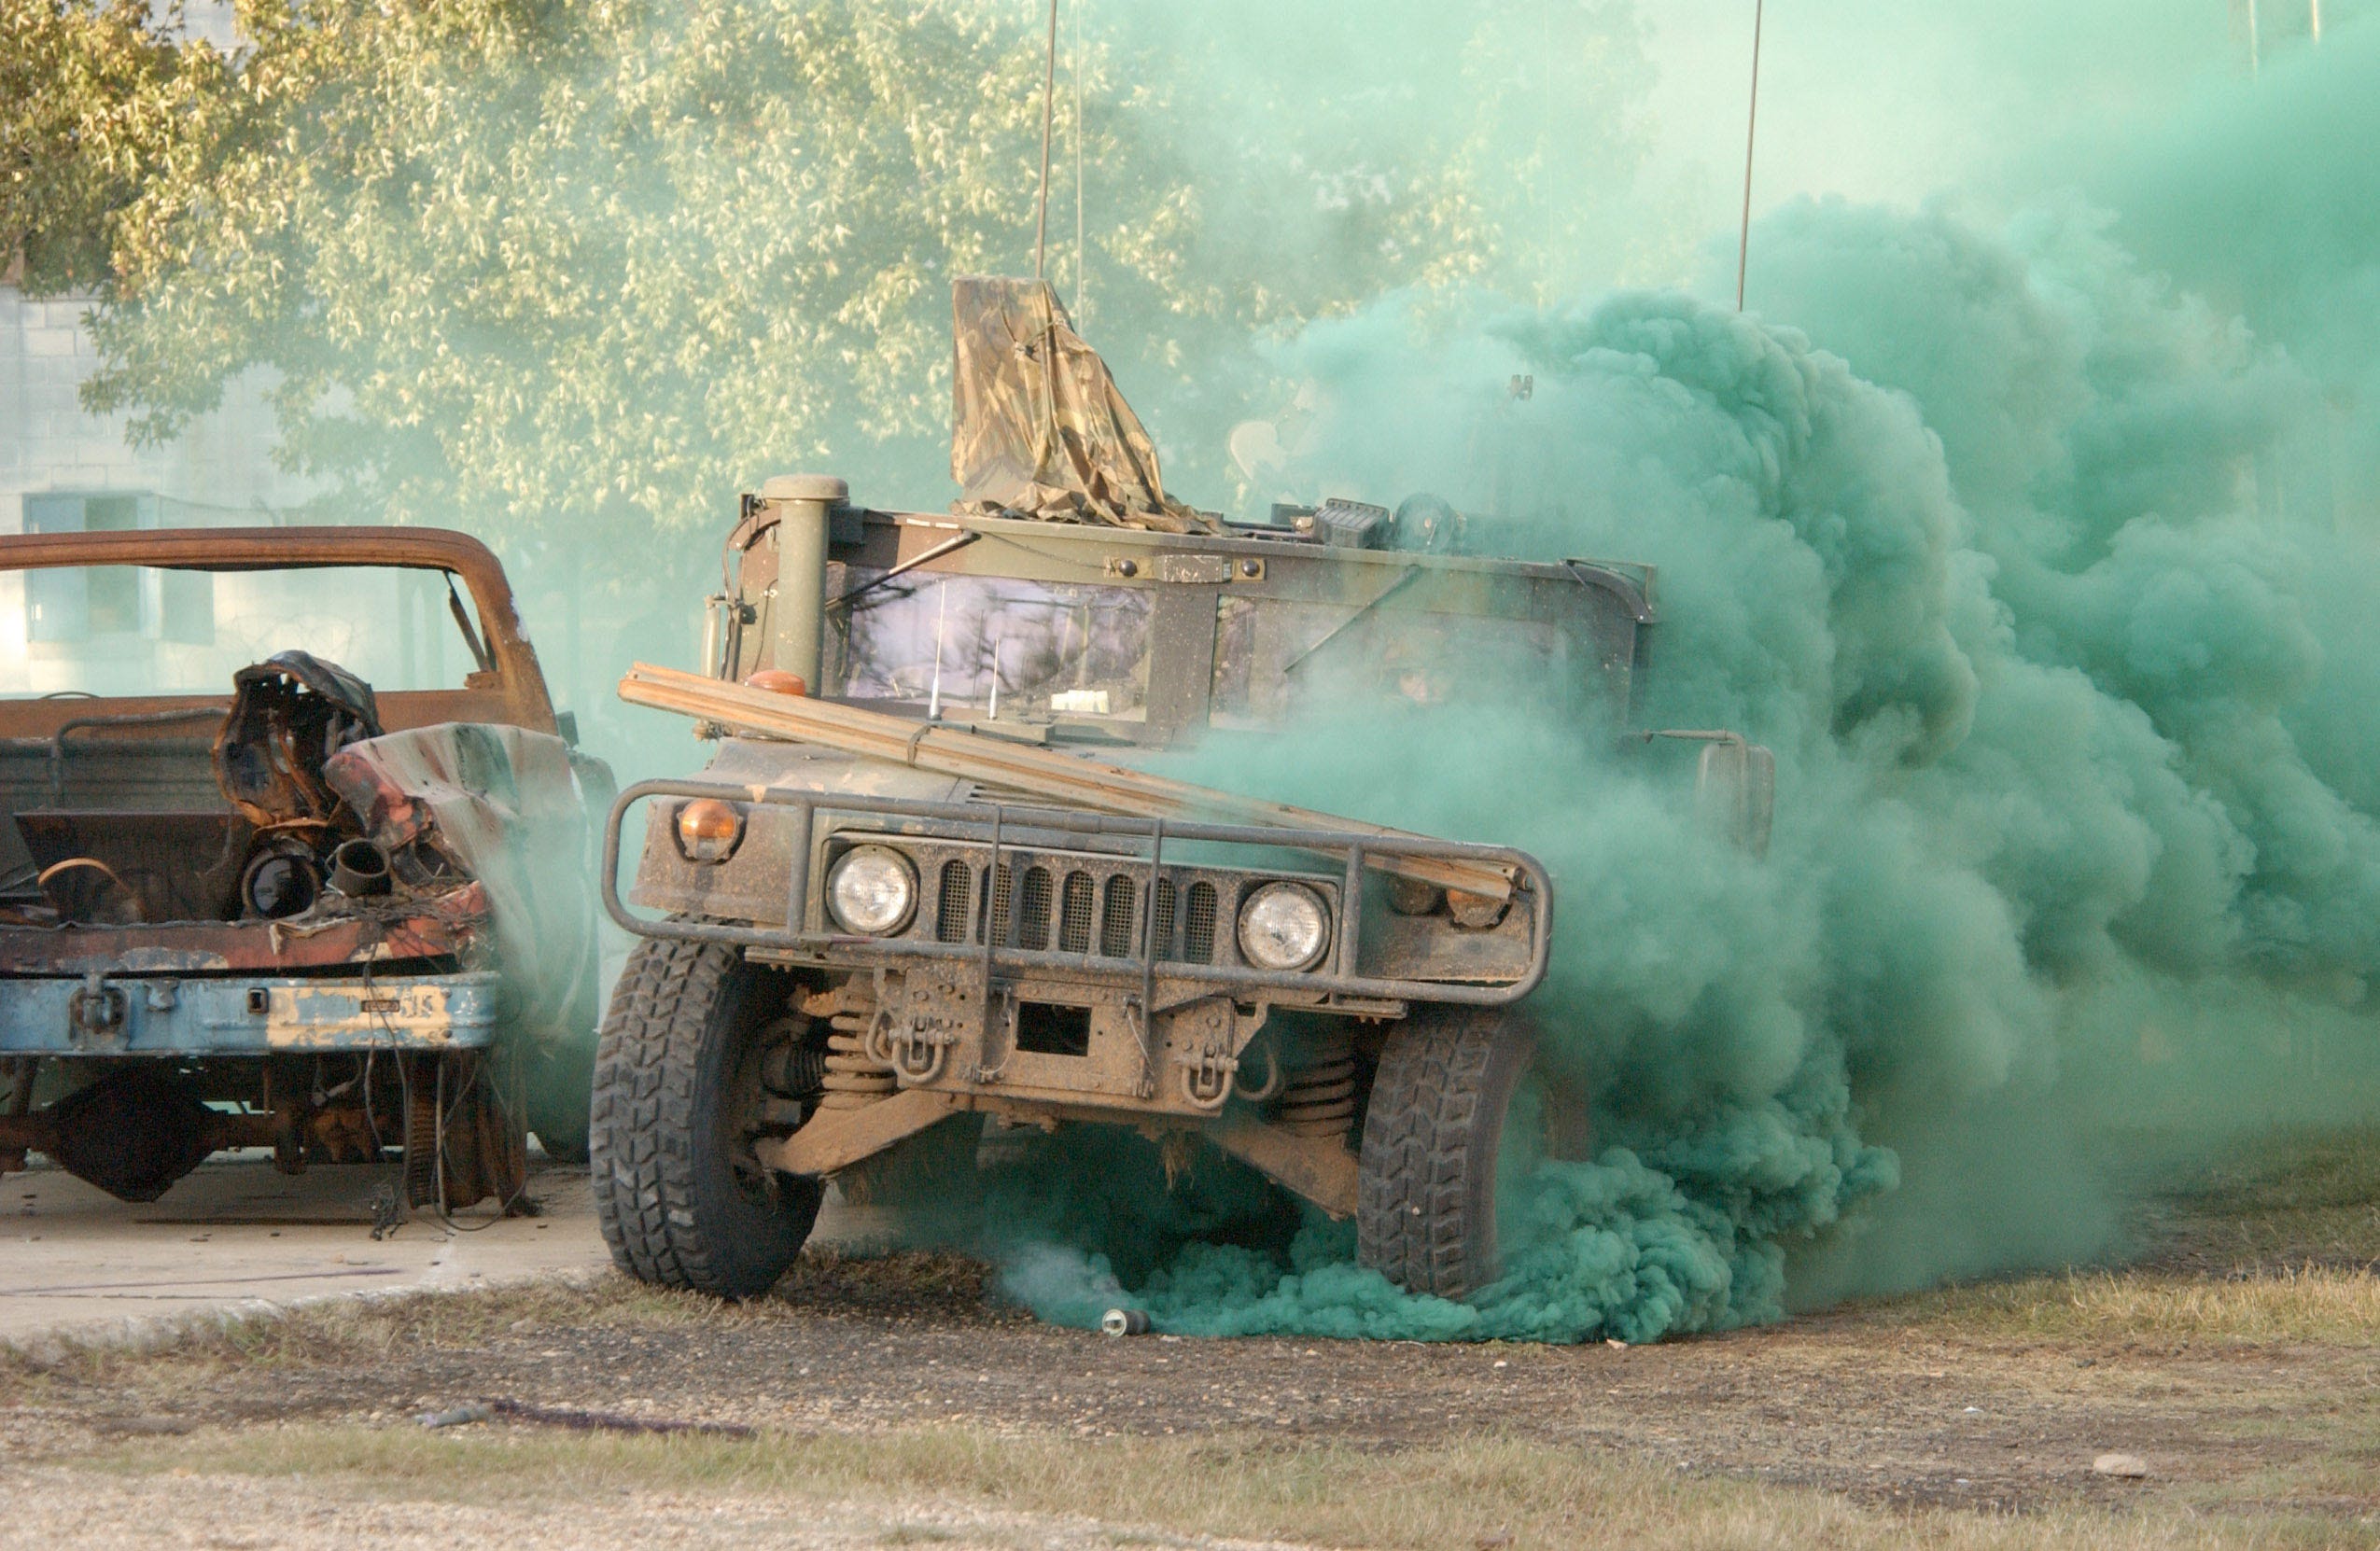 Watch This Badass Tribute to the Army's Legendary Humvee